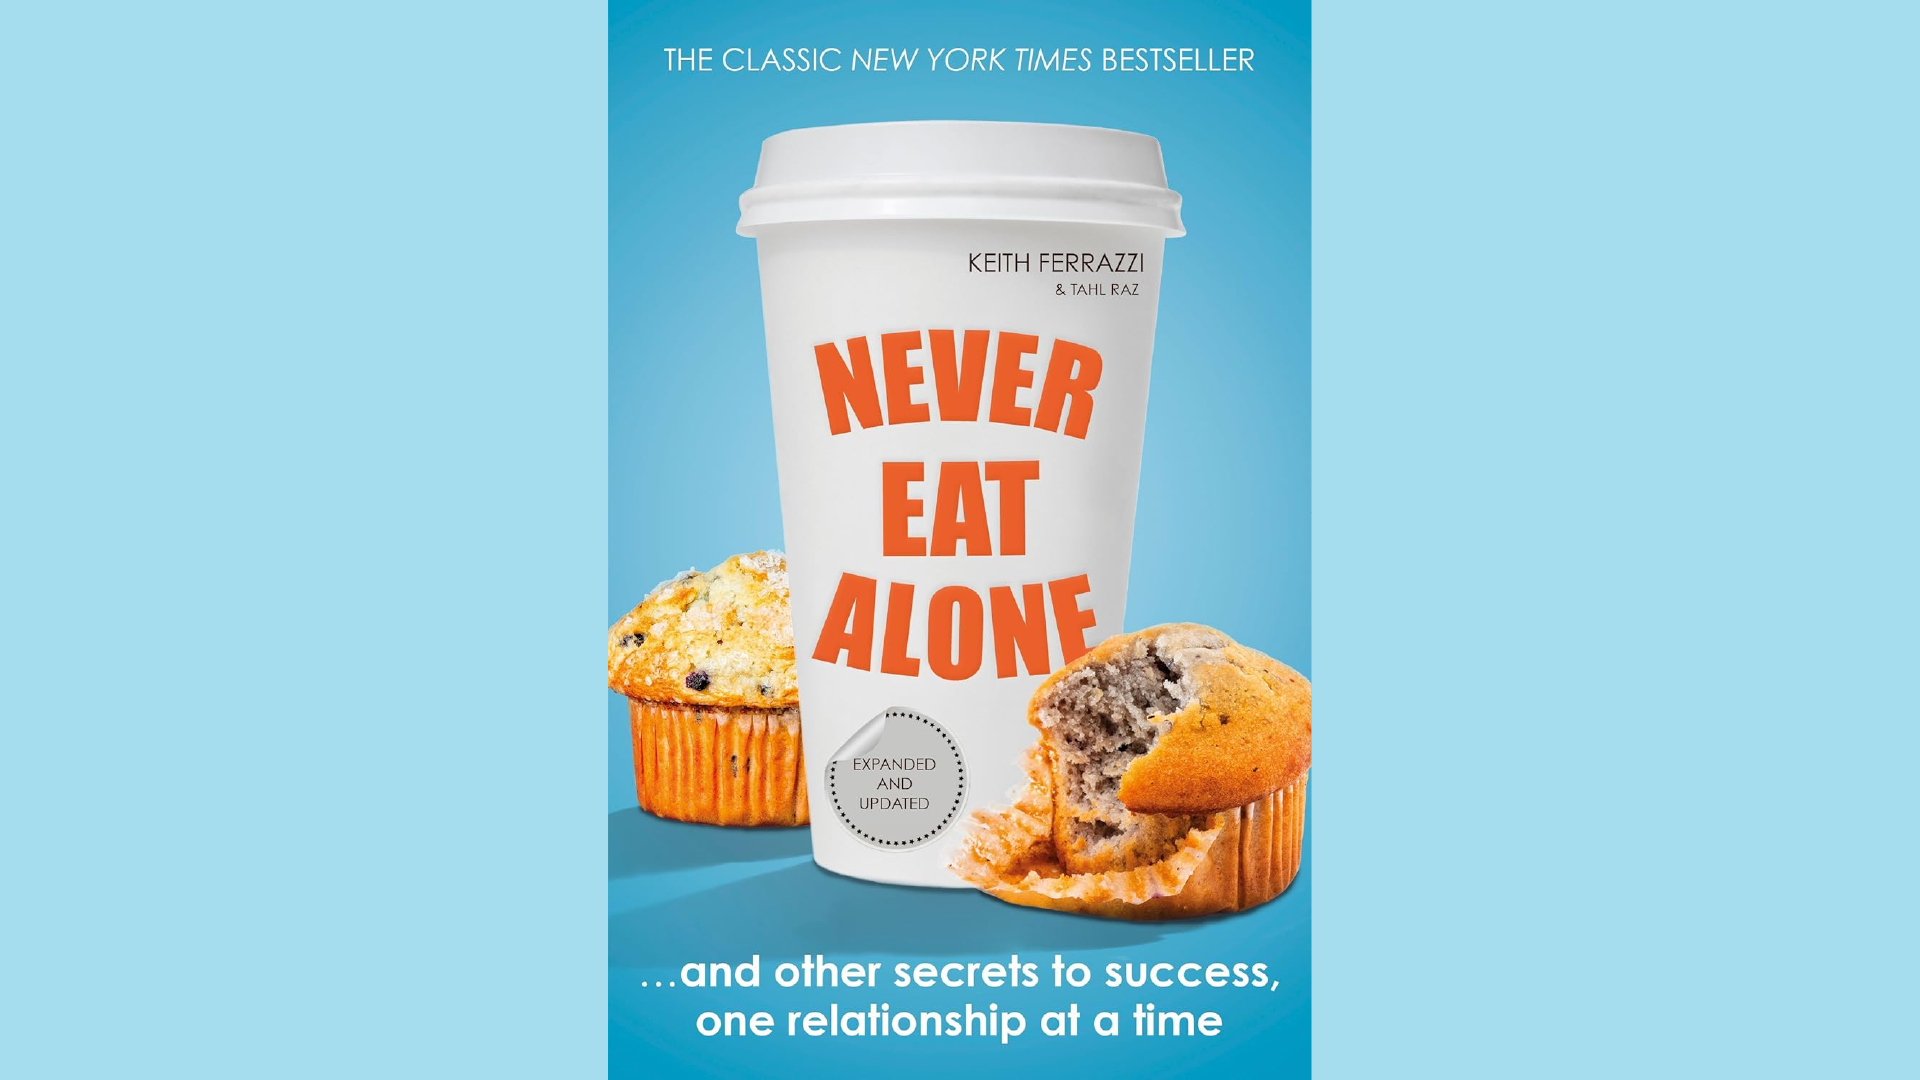 Summary: Never Eat Alone by Keith Ferrazzi